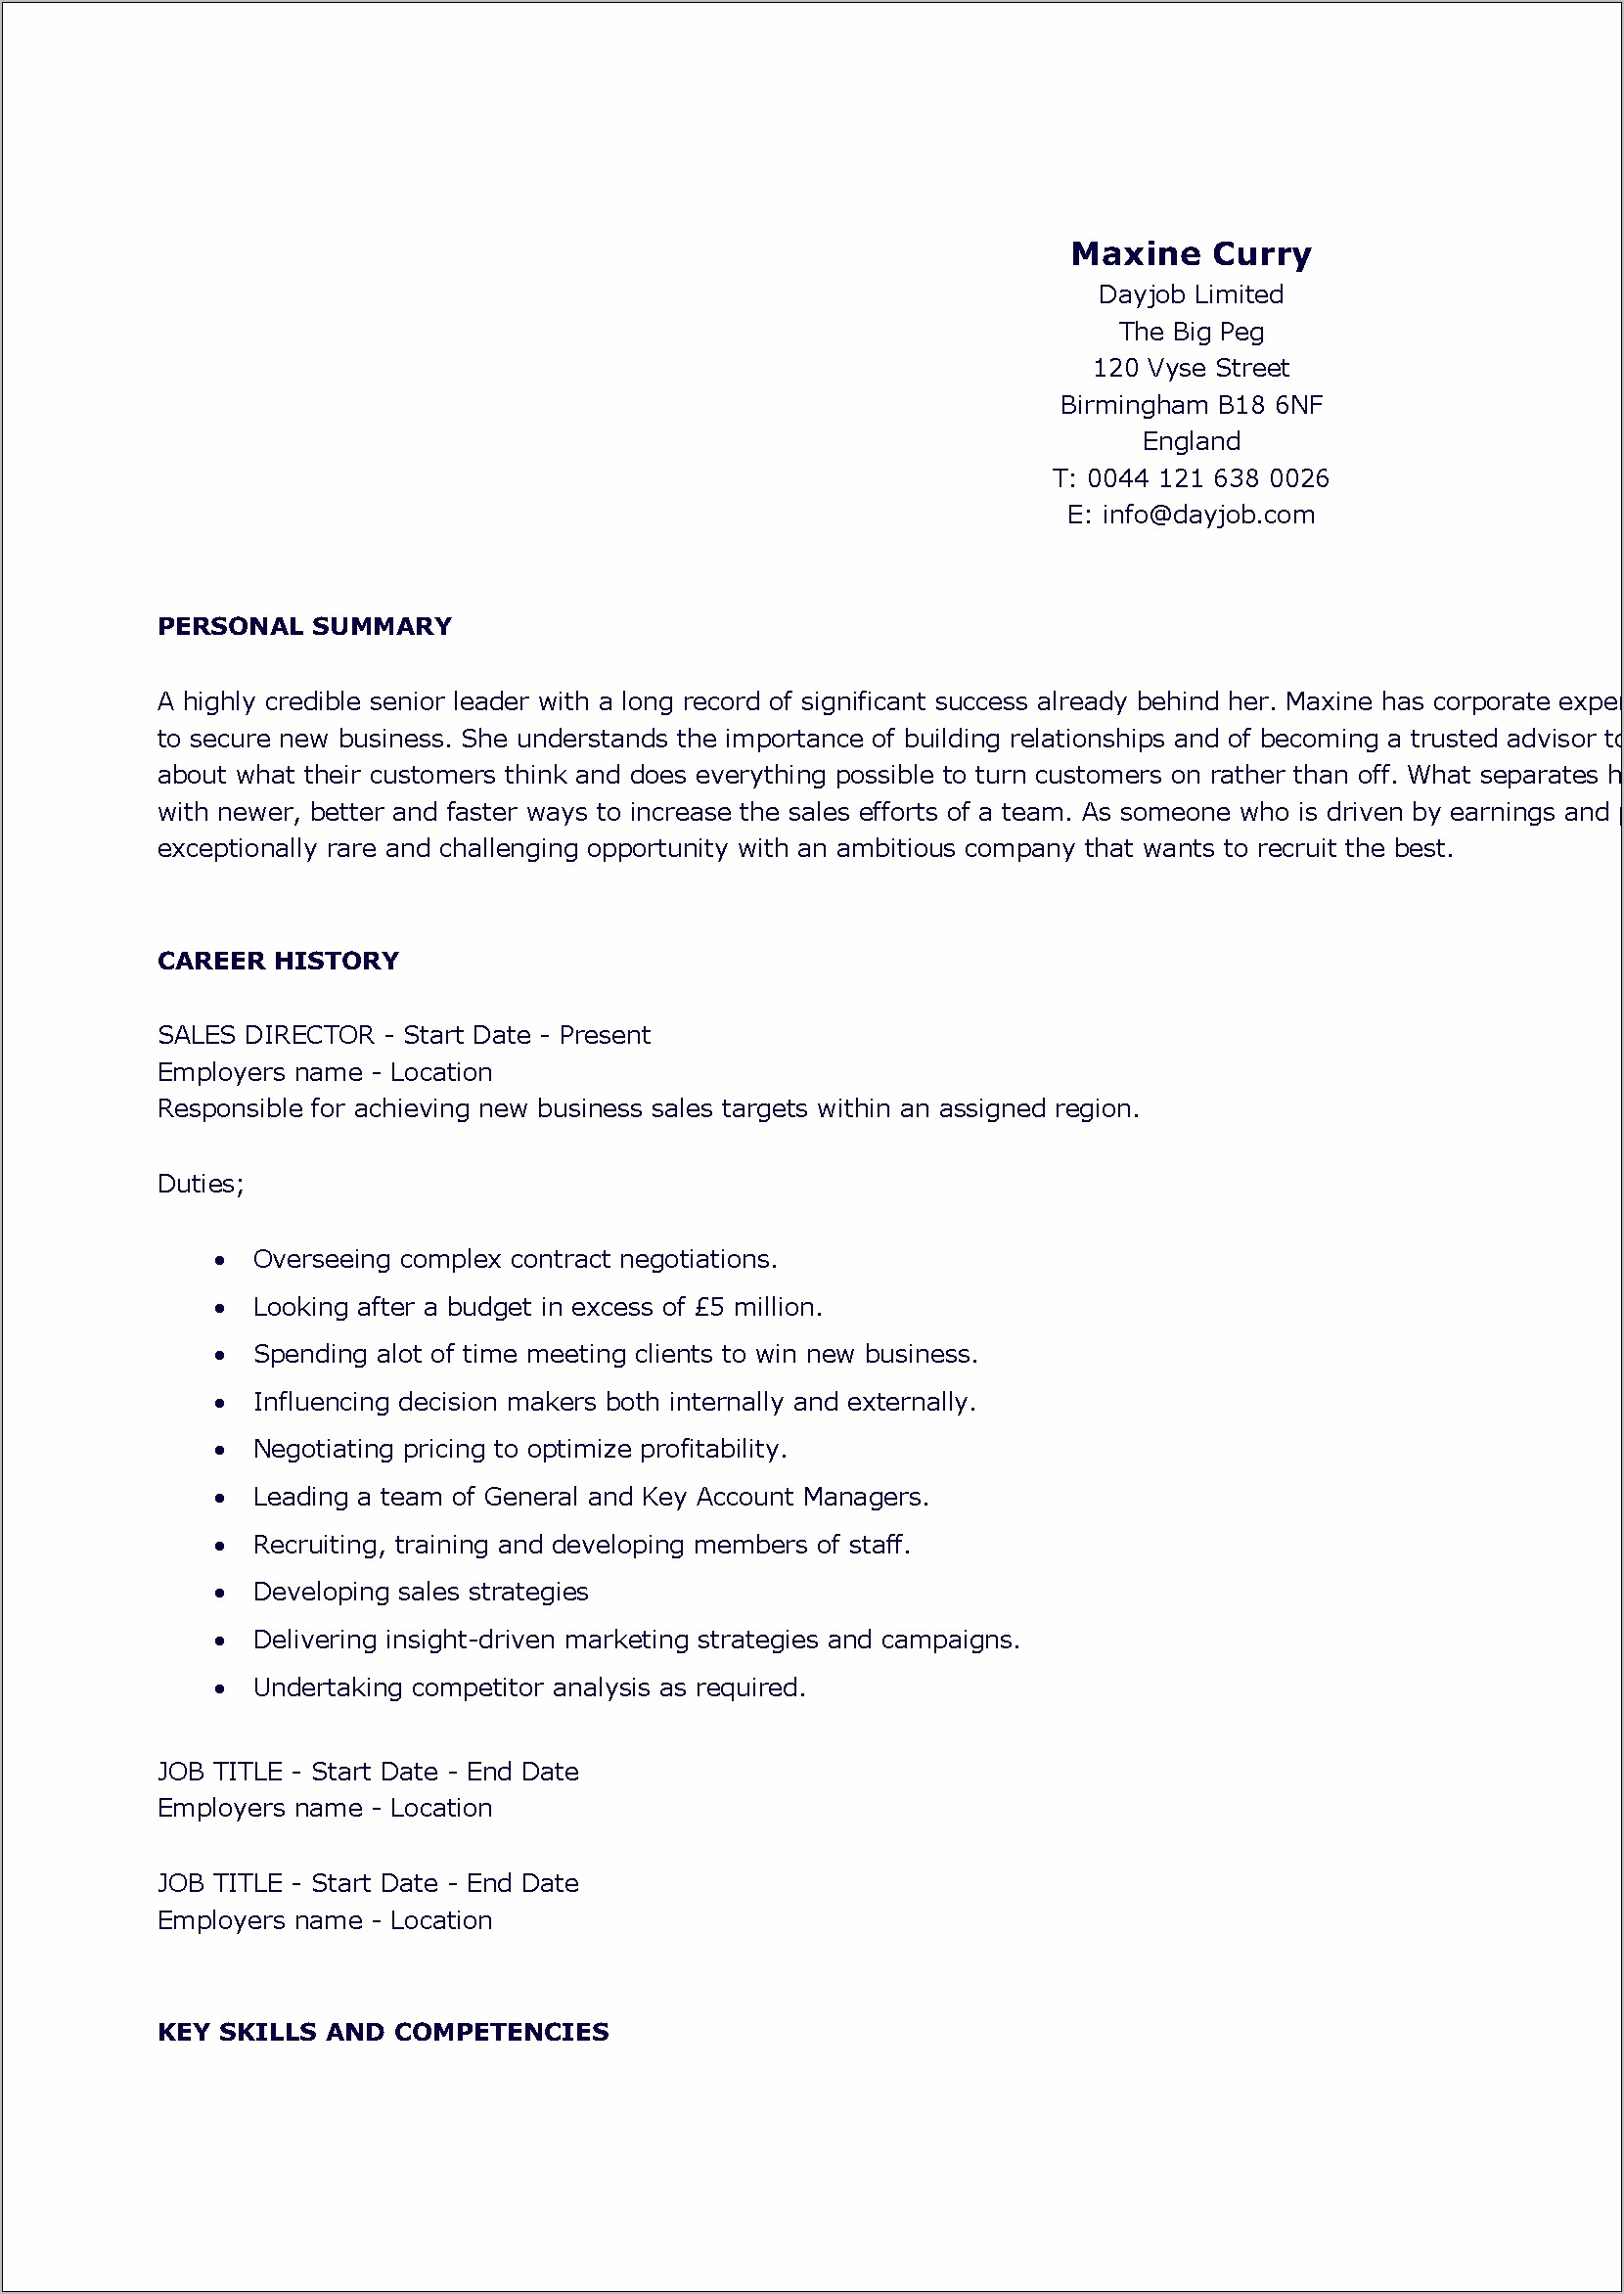 Key Skills And Compentencies For Resume